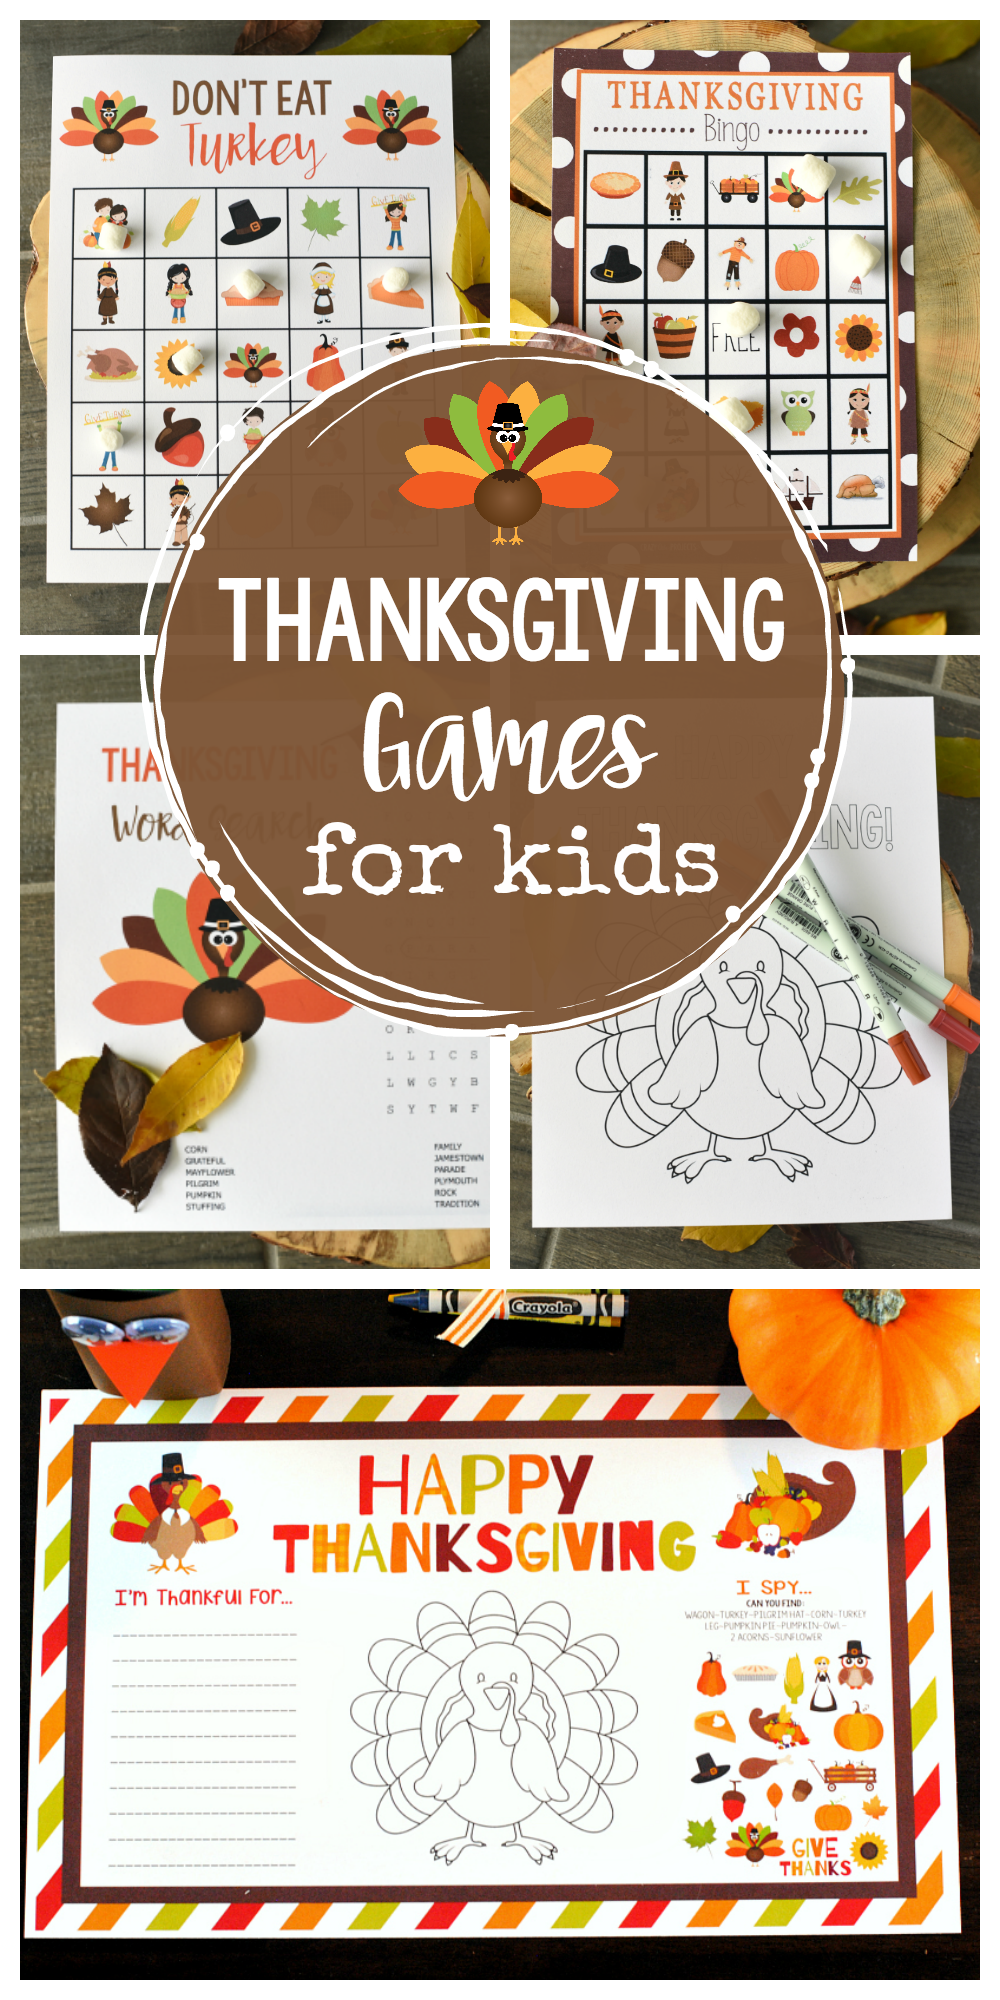 Thanksgiving Games and Activities for Kids-Print and play these fun games and activities for kid while the turkey cooks! Thanksgiving Bingo, word search, coloring pages and Don't Eat Pete. #thanksgiving #thanksgivingfun #kidsactivties